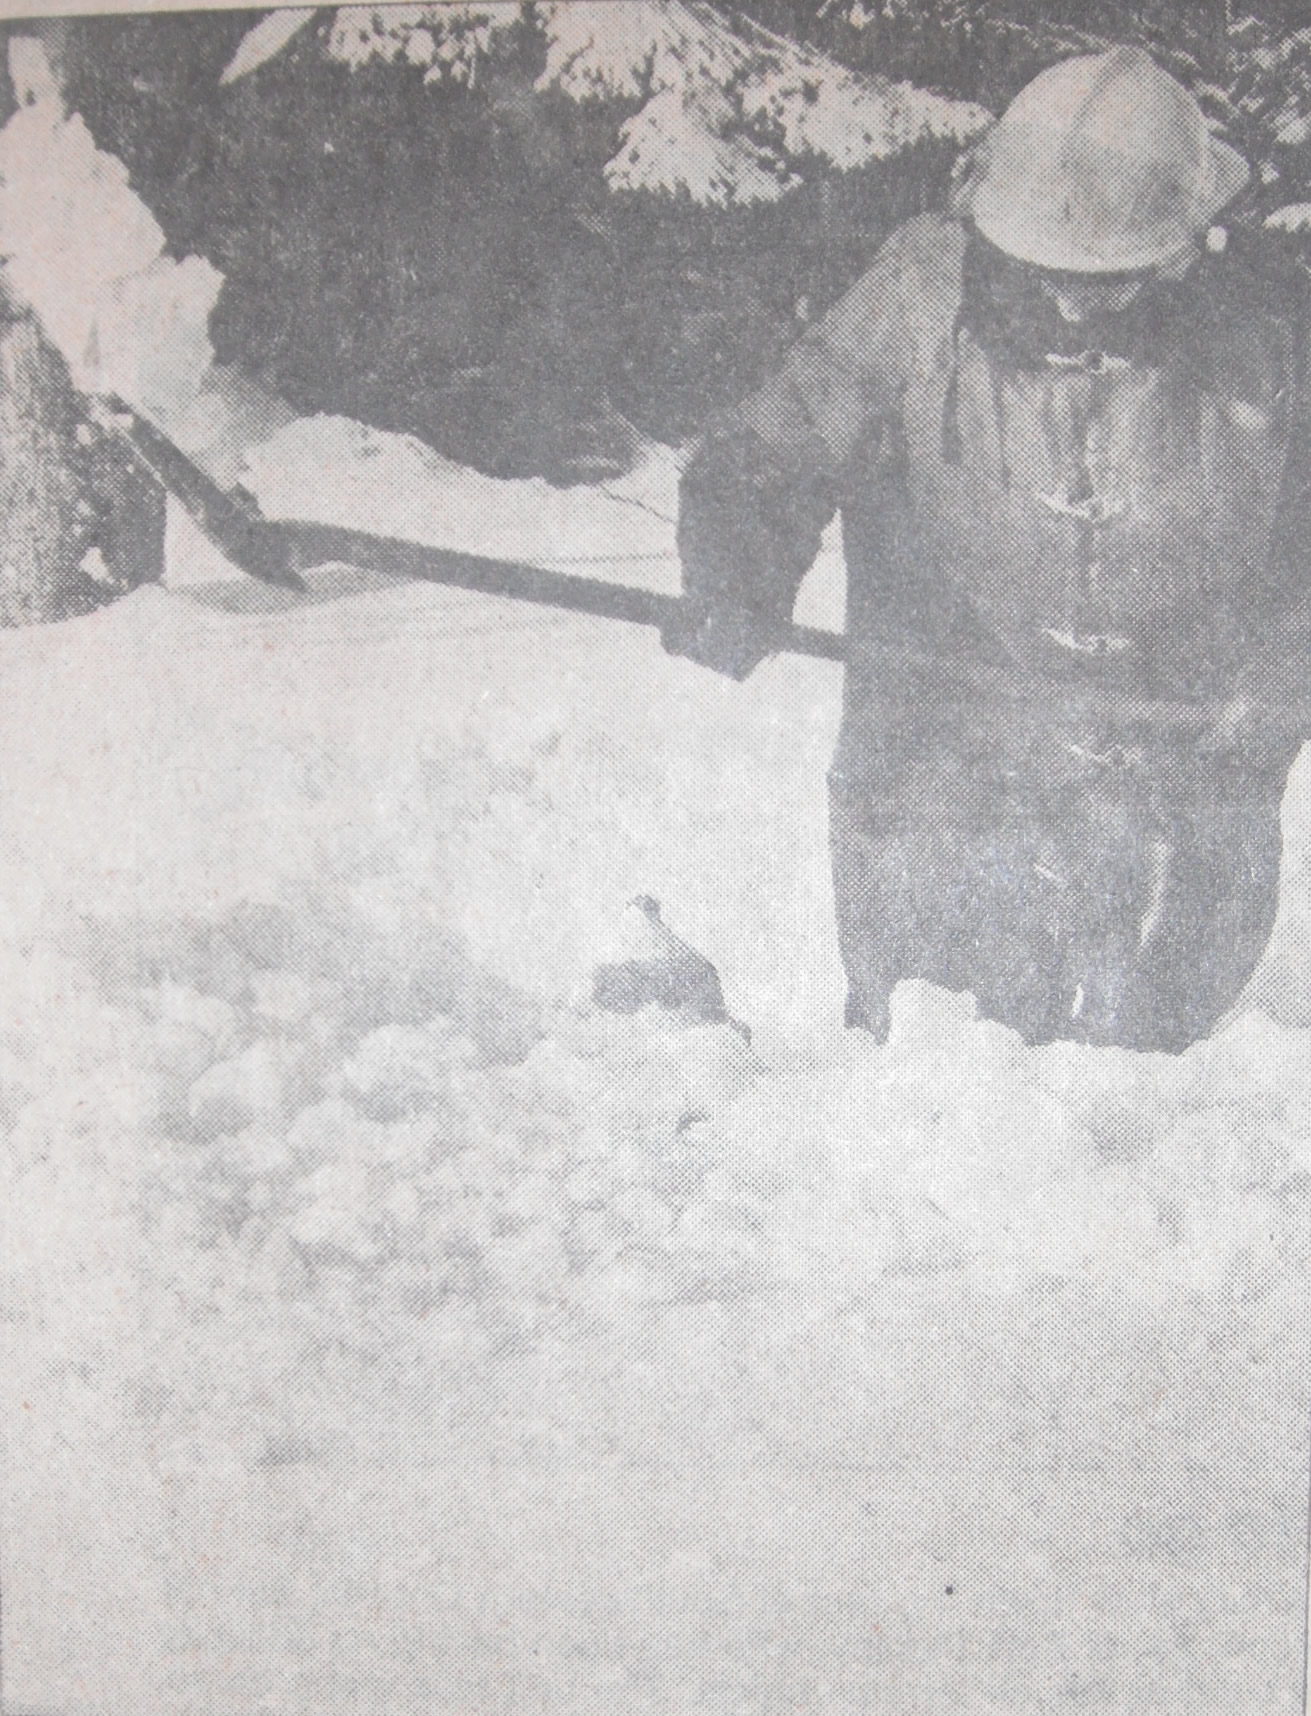 Firefighter Jim Myatt digging out the snow around a fire hydrant 